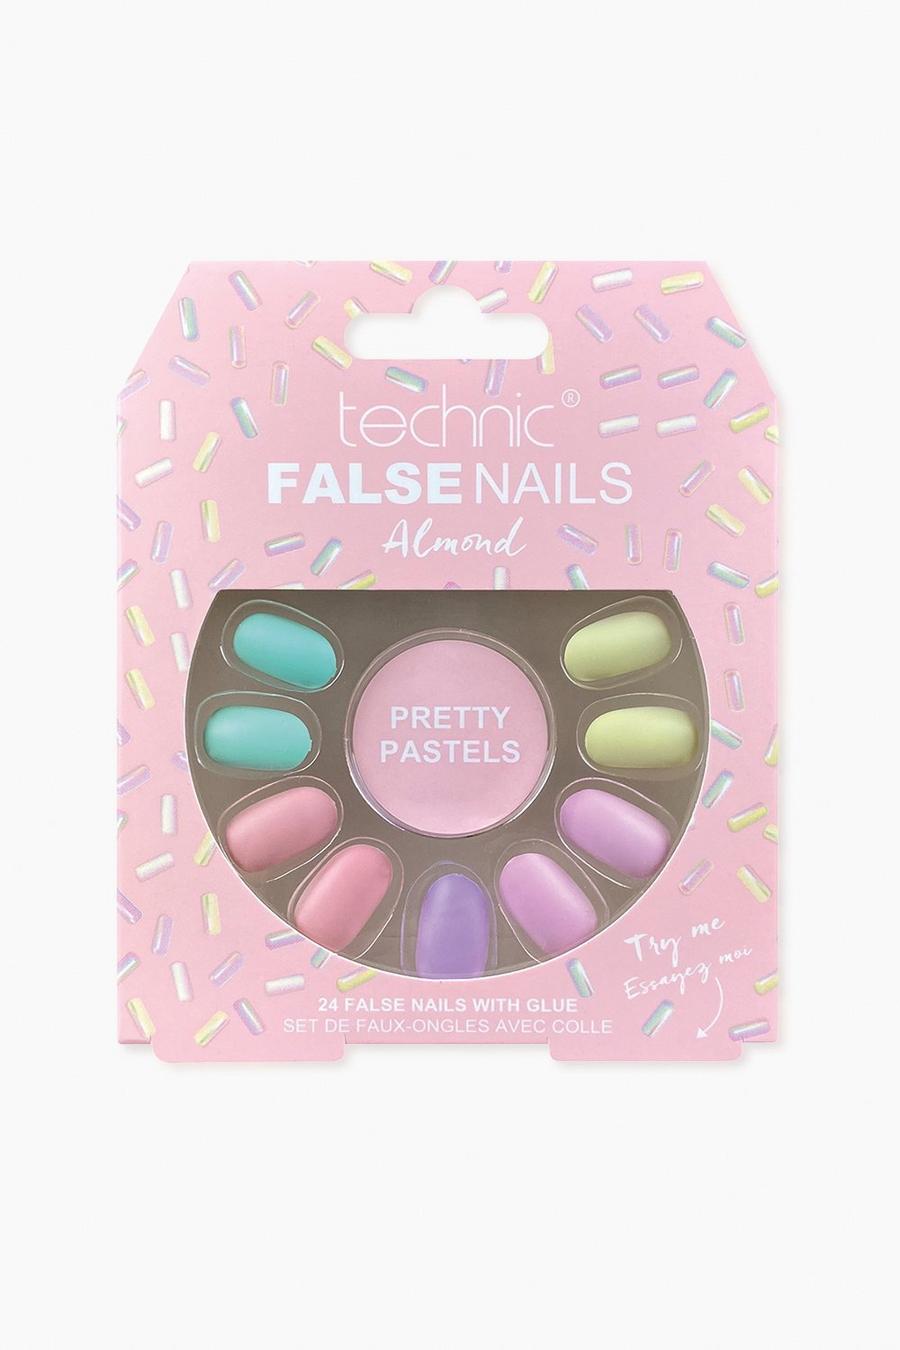 Technic - Faux ongles Almond - Pretty Pastels, Multi image number 1